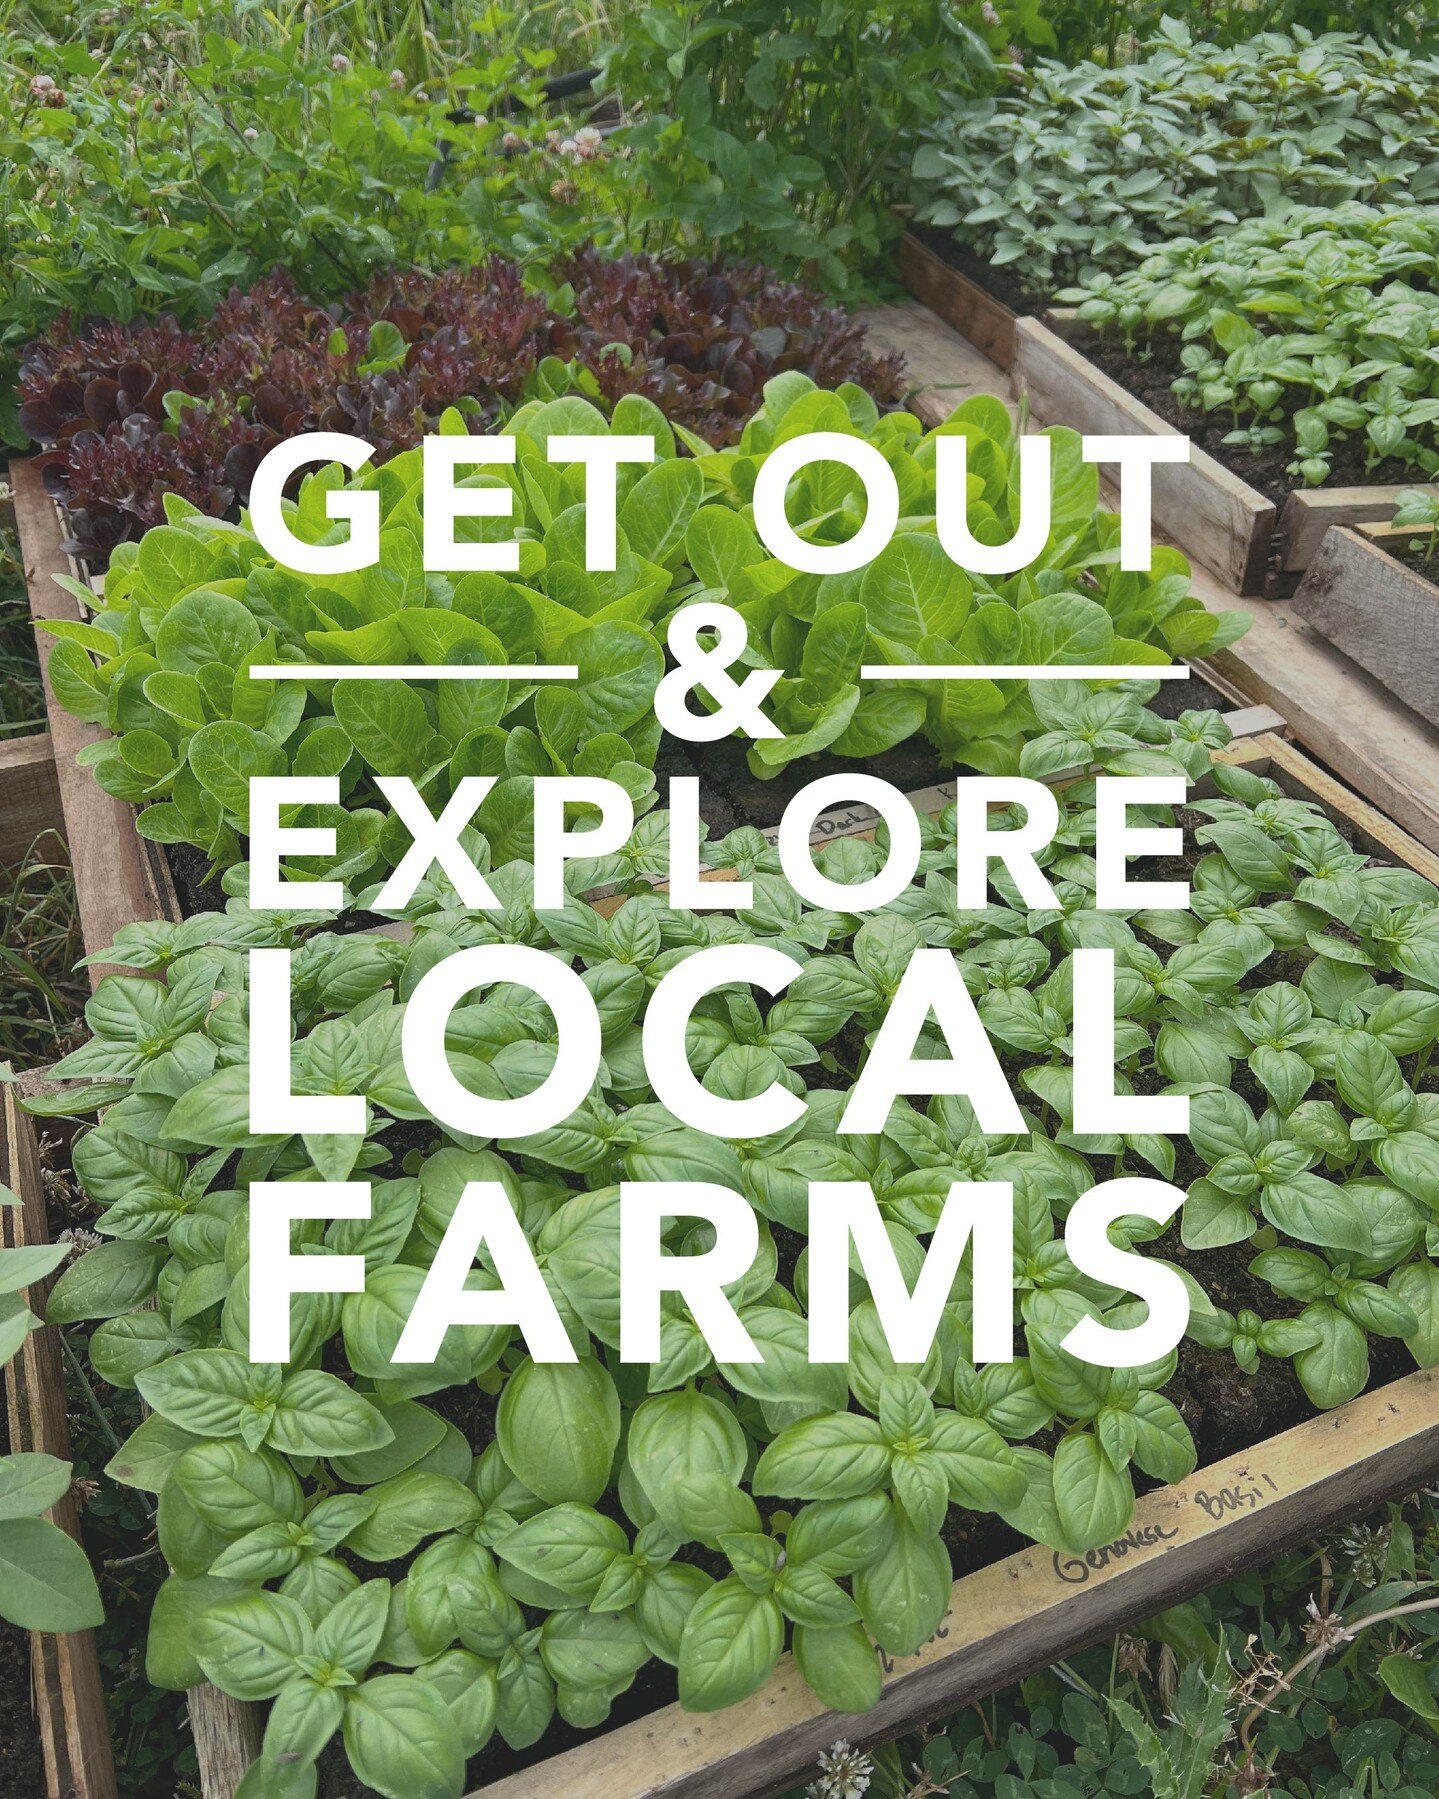 The Co-op Farm Tour is today! 🌞 Join us from 10 am - 4 pm today (7/16) as 21 local sustainable and organic farms open their doors to you for a day of fun and learning on the farm. Besides touring farms, there will be activities like:

🐄  Farming de